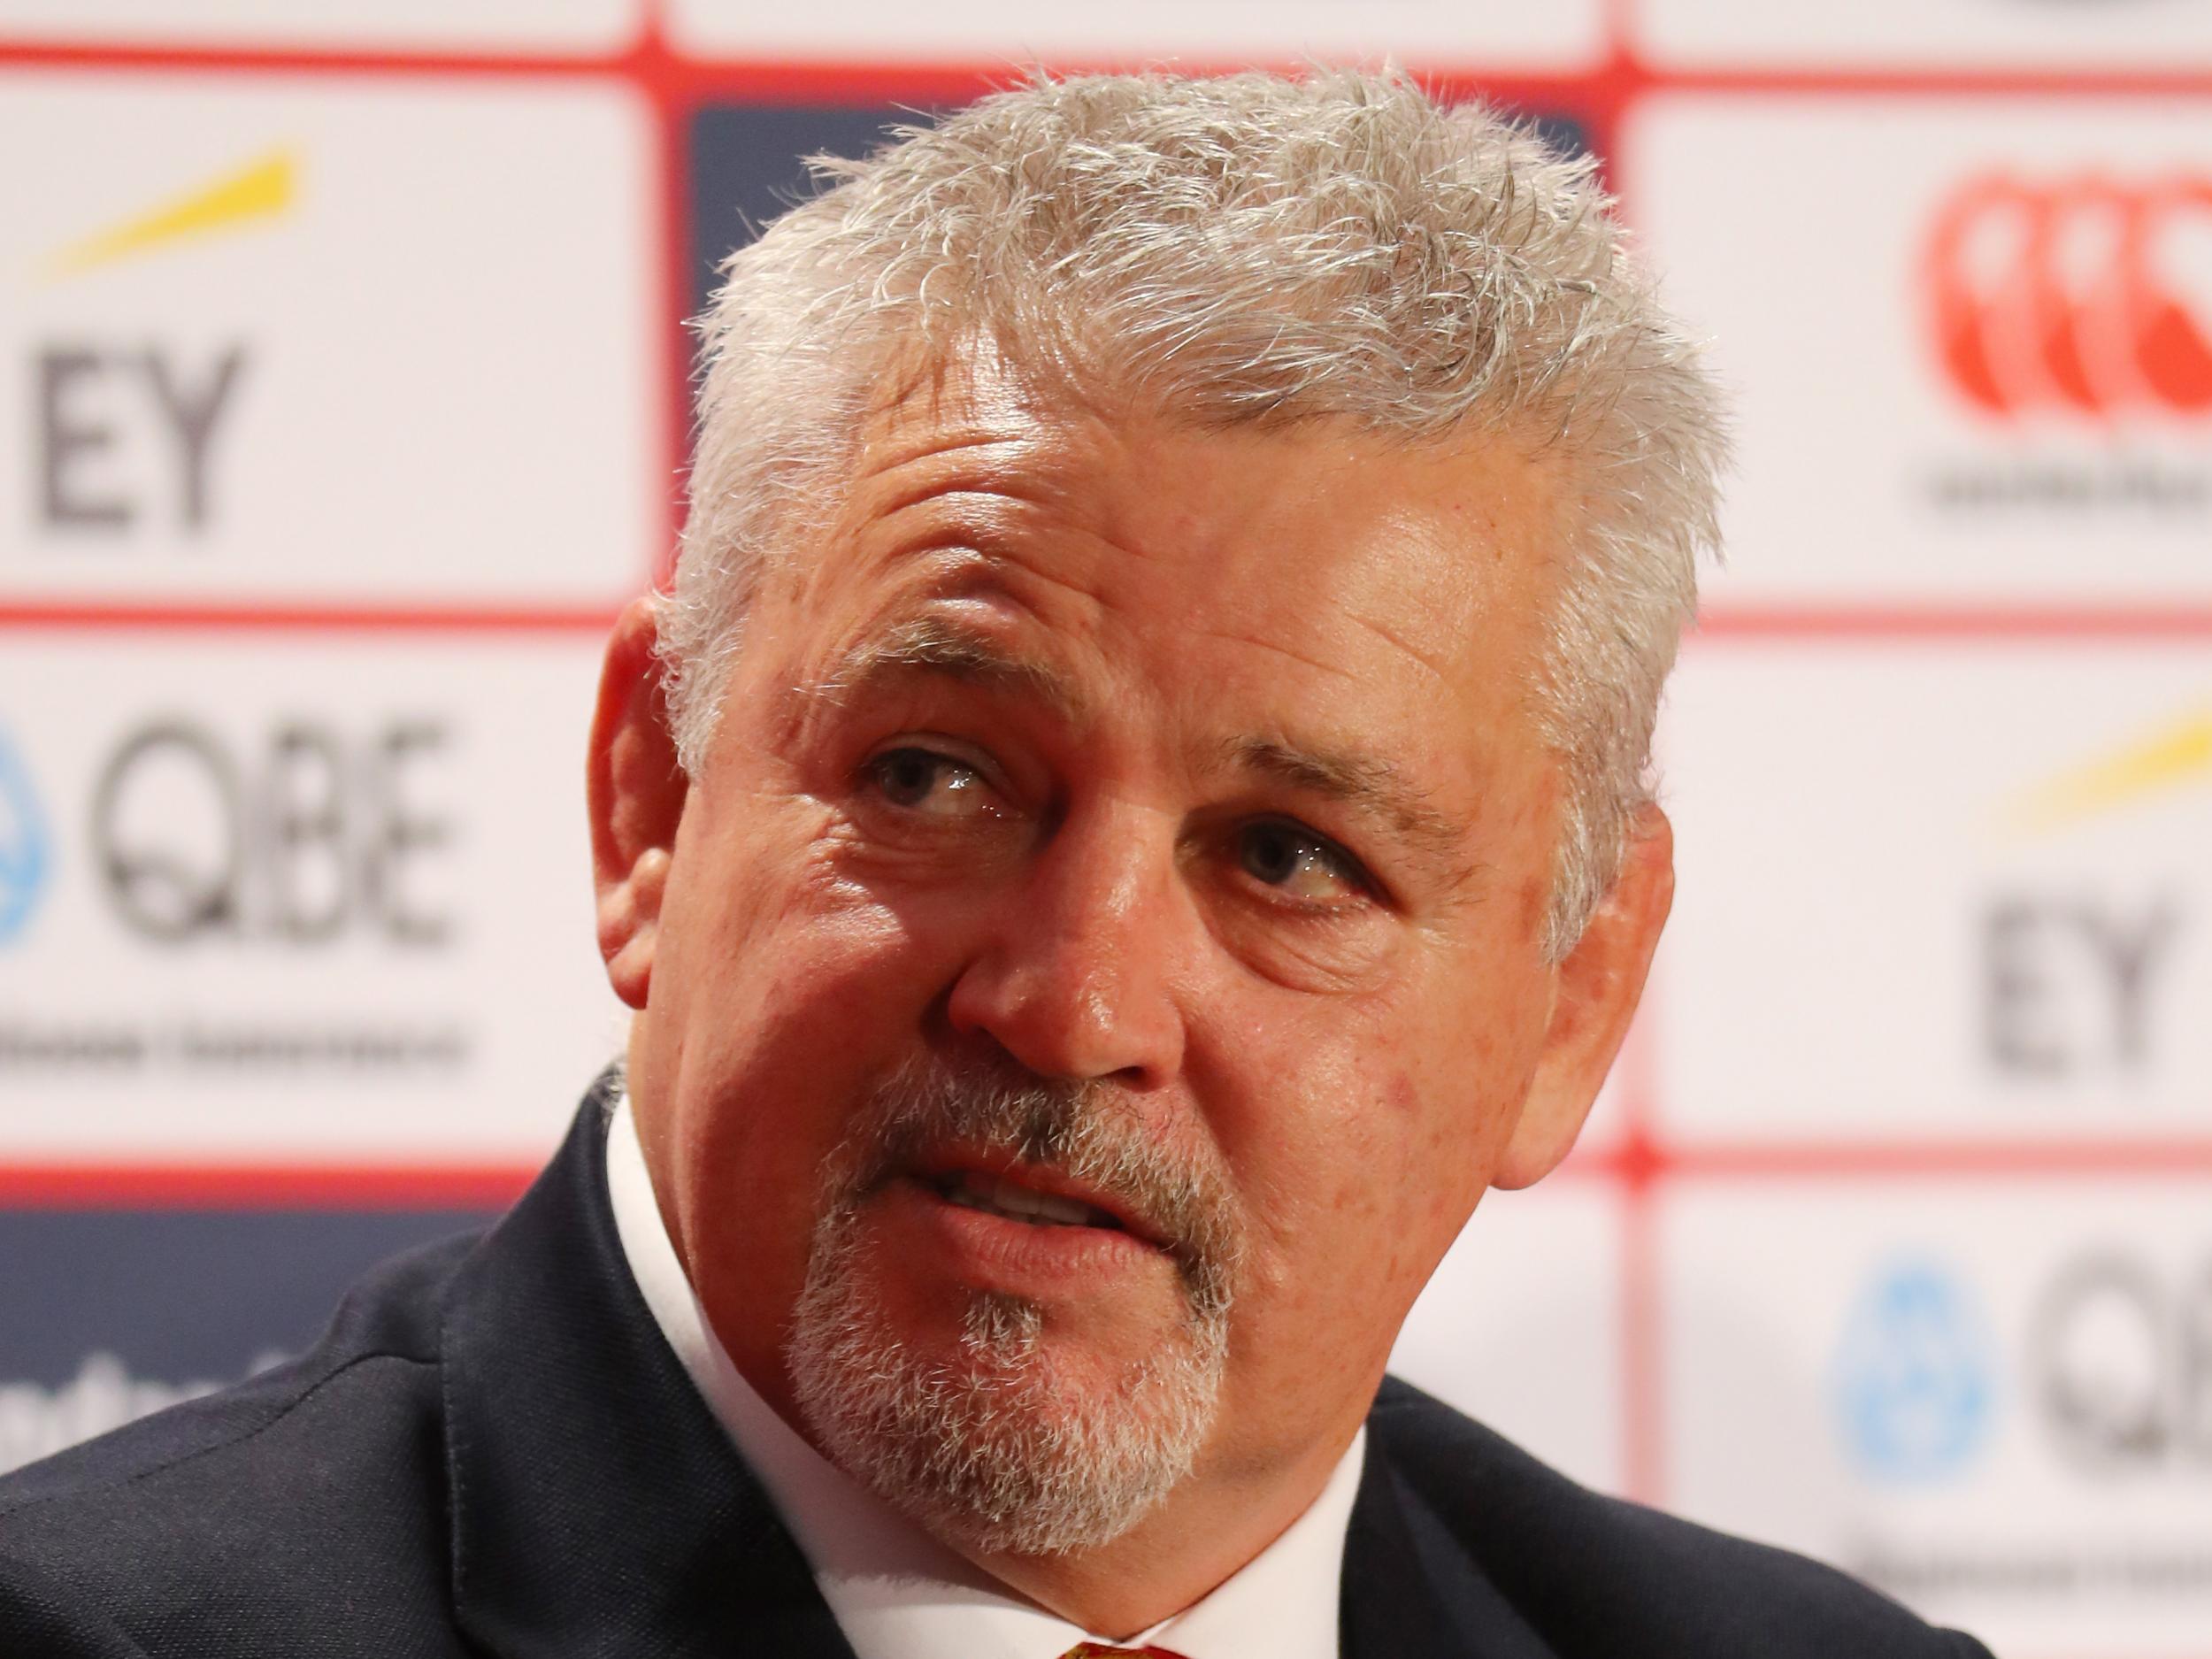 Gatland elected to take Stuart Hogg and Leigh Halfpenny as full-backs instead